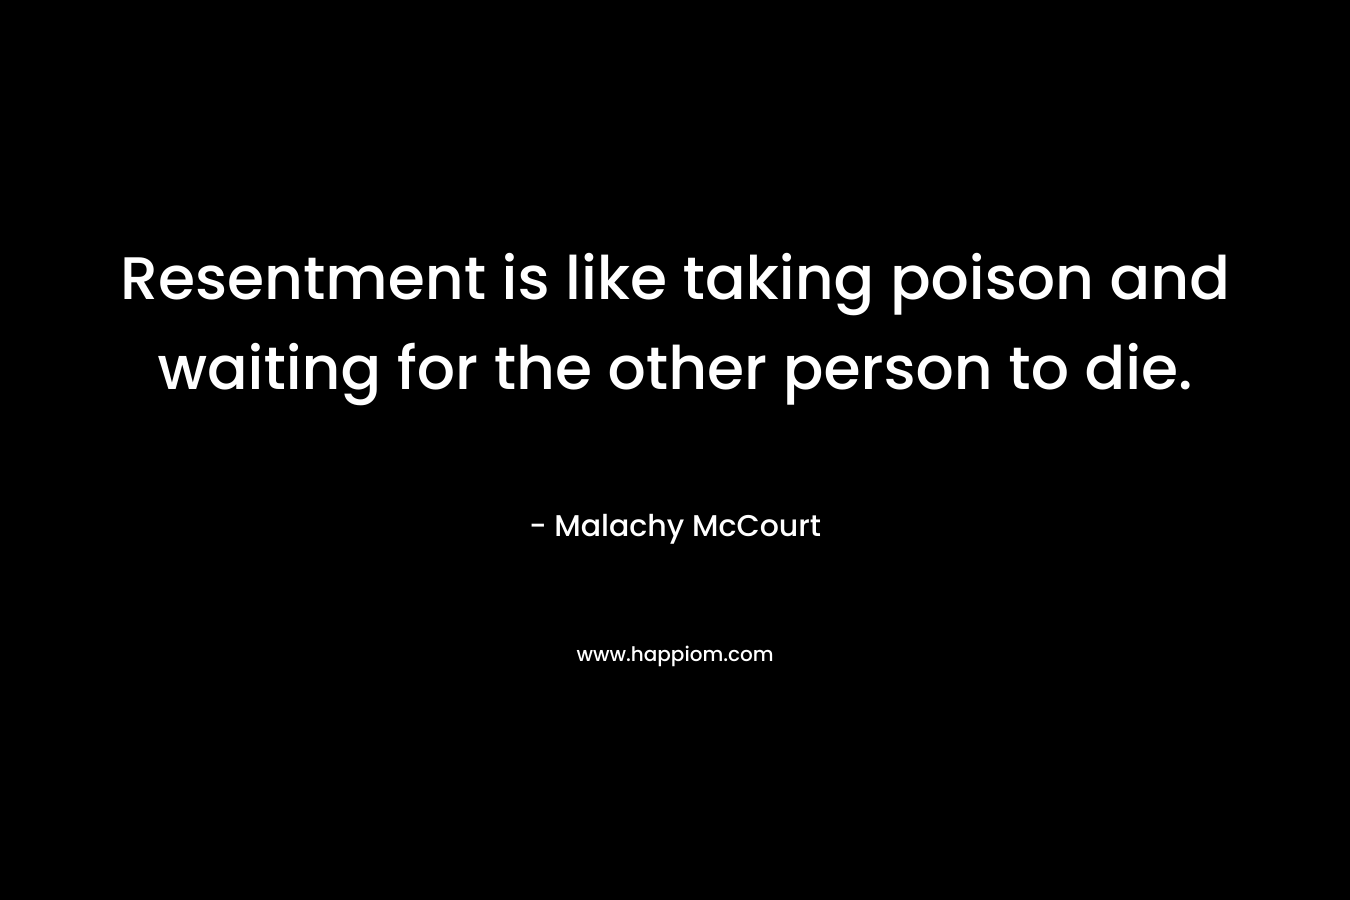 Resentment is like taking poison and waiting for the other person to die. – Malachy McCourt